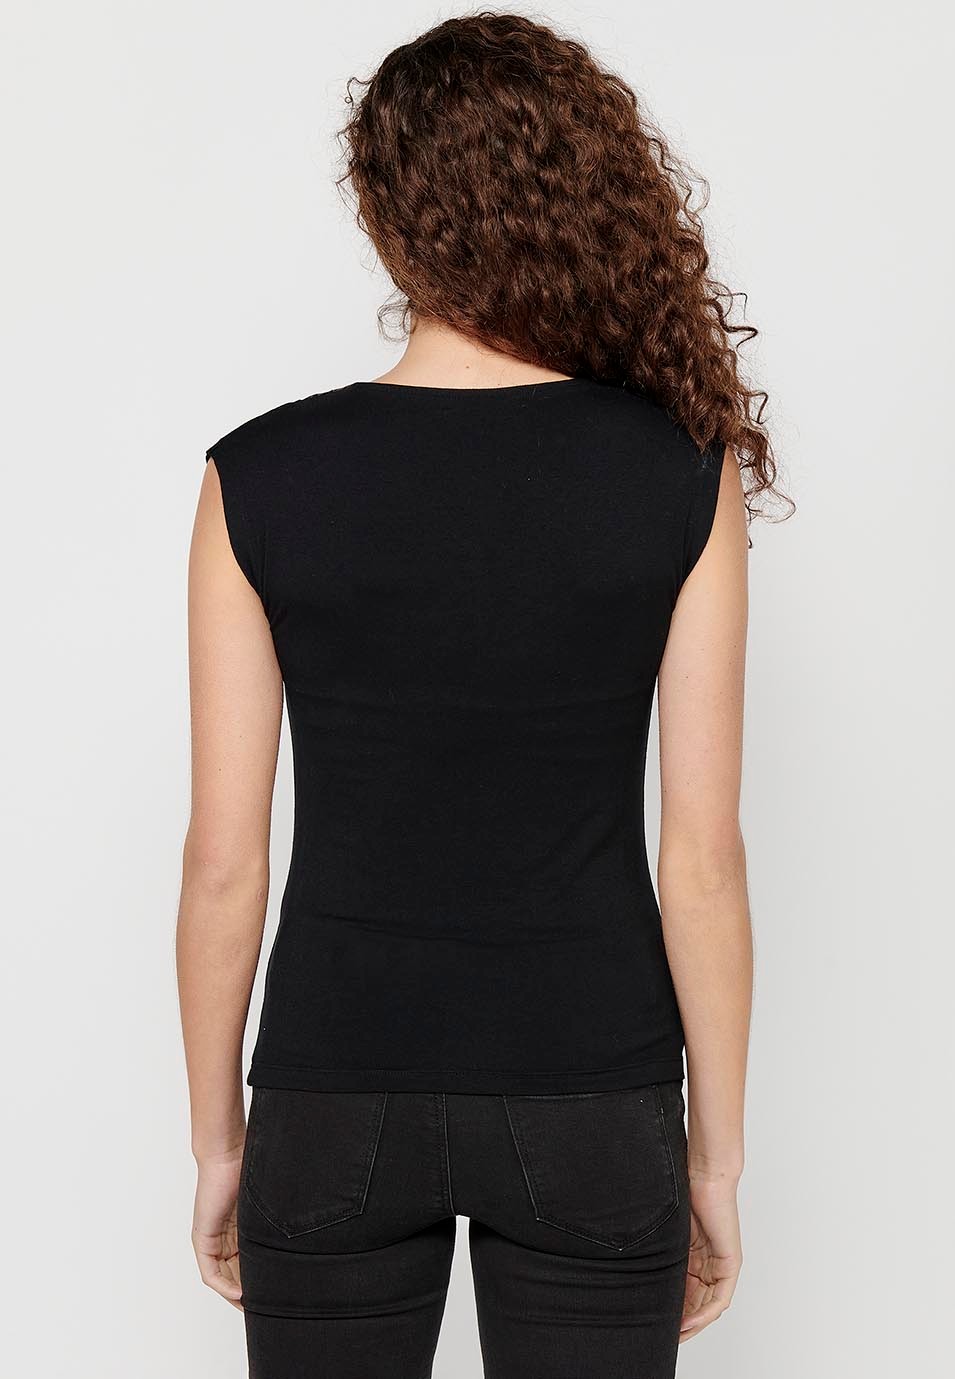 Black Sleeveless T-shirt with Printed Front Detail and Round Neck for Women 6